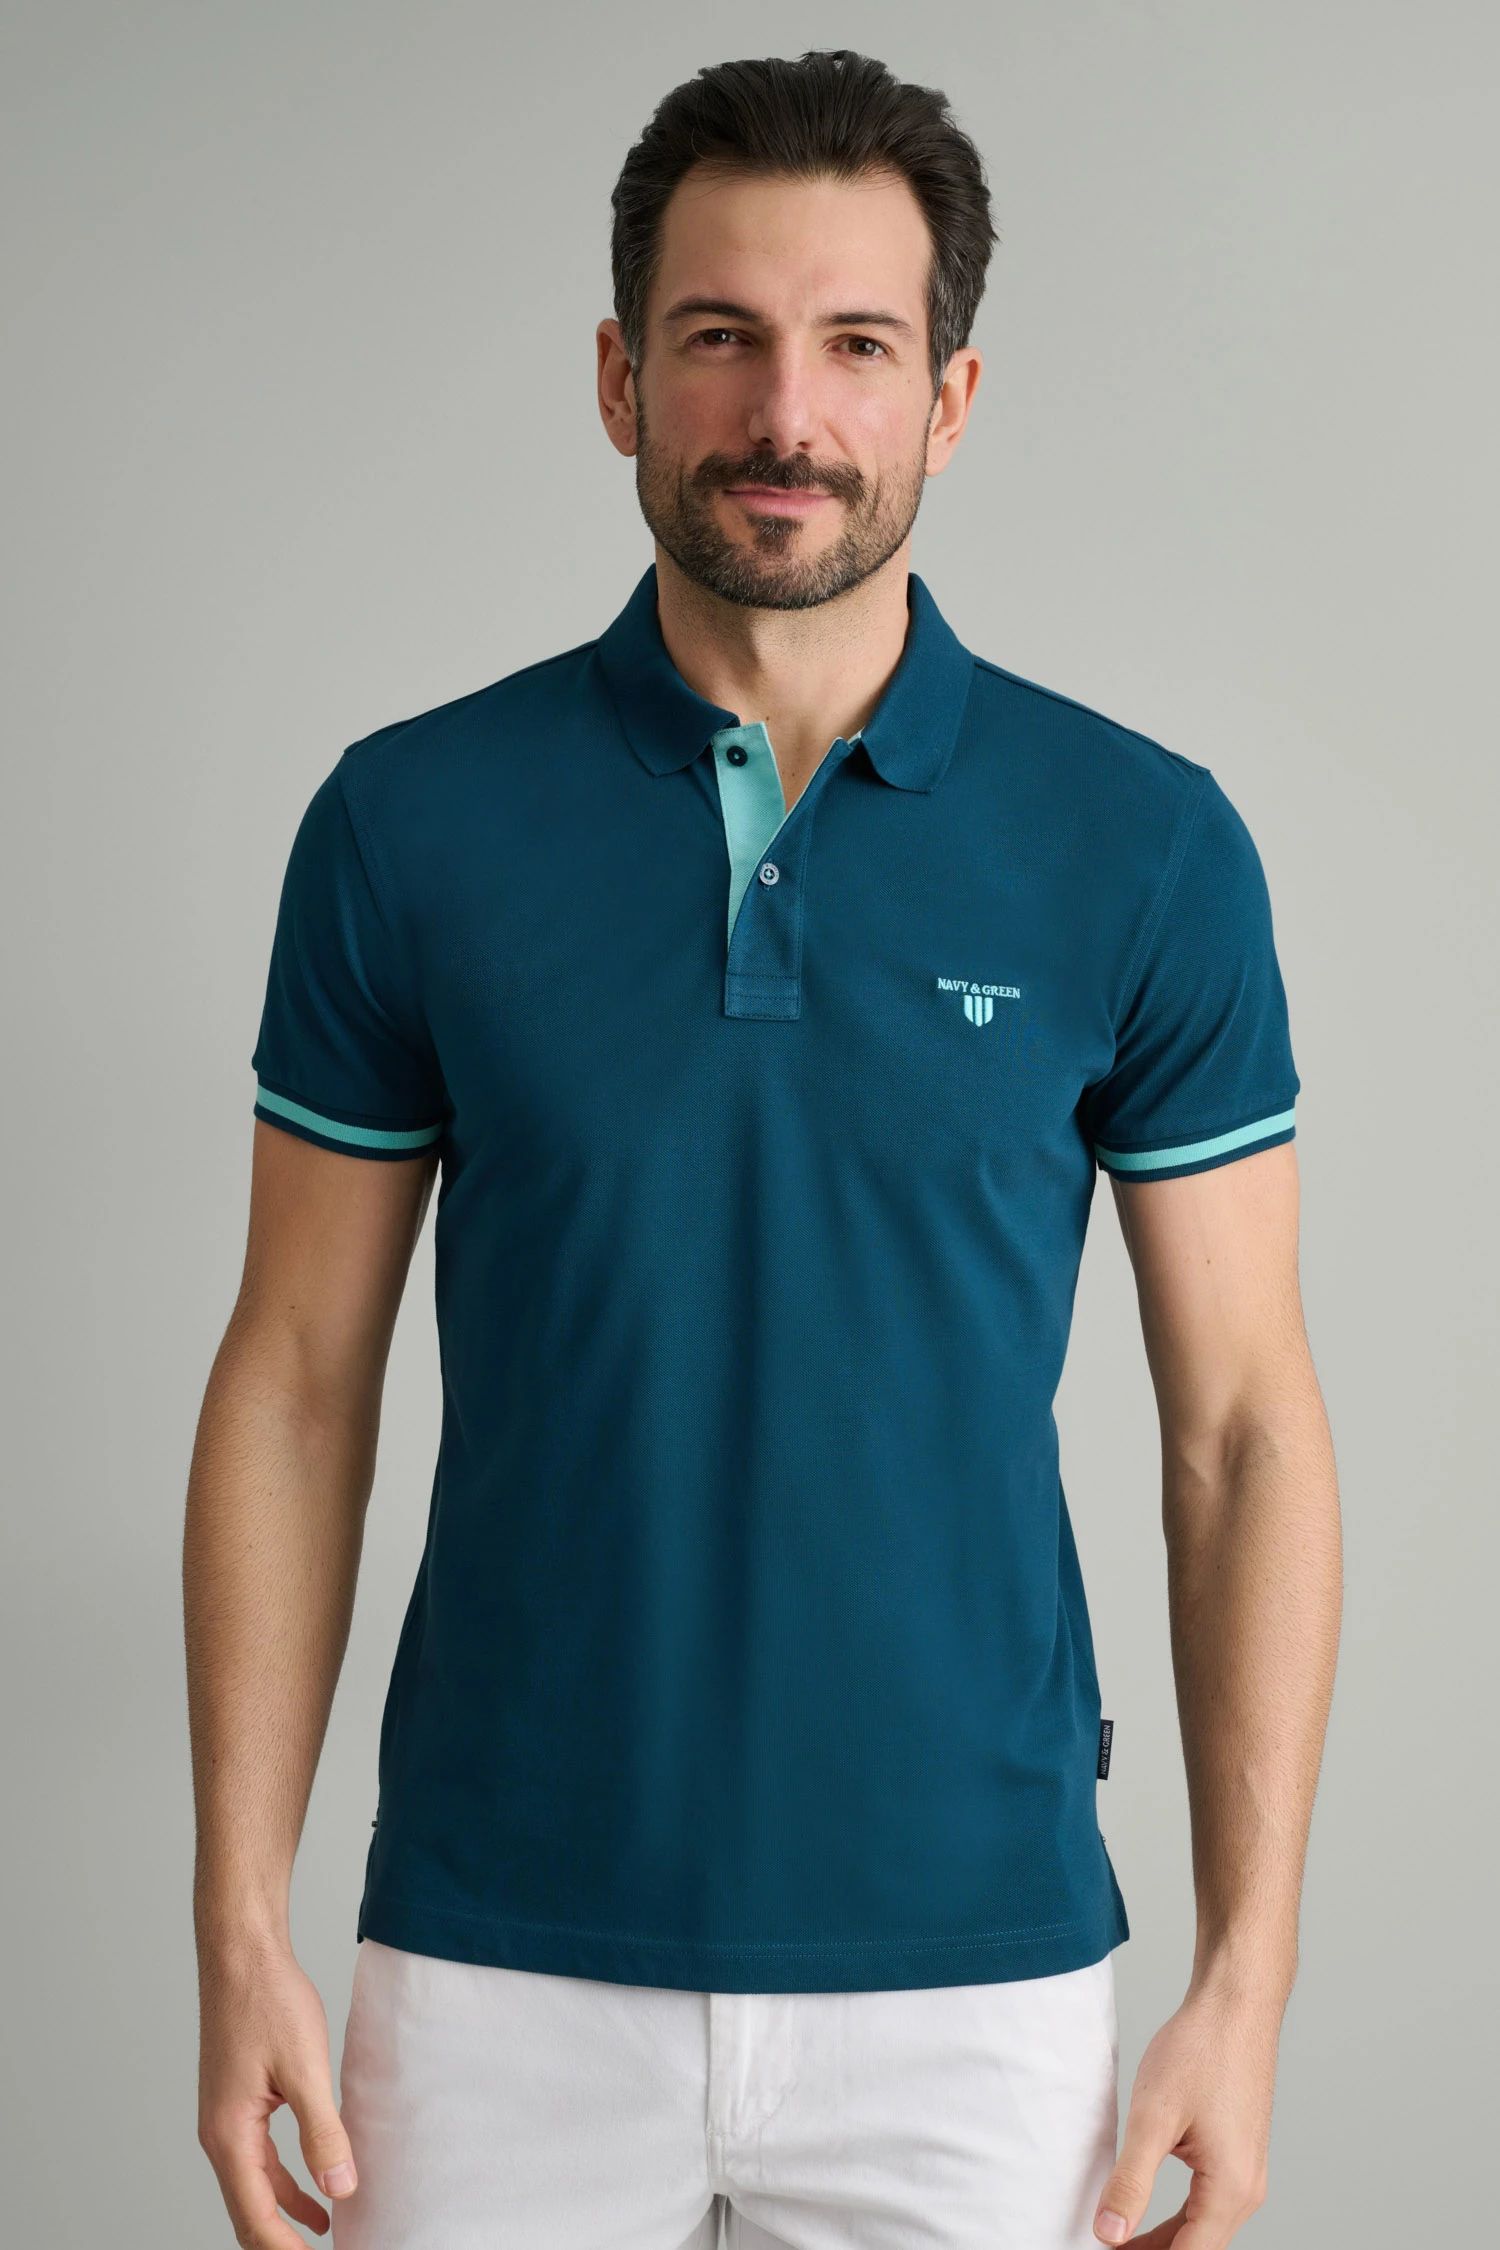 NAVY&GREEN POLO ΜΠΛΟΥΖΑΚΙ-YOUNG LINE 24GE.879/YL.2-MOROCCAN BLUE Petrol